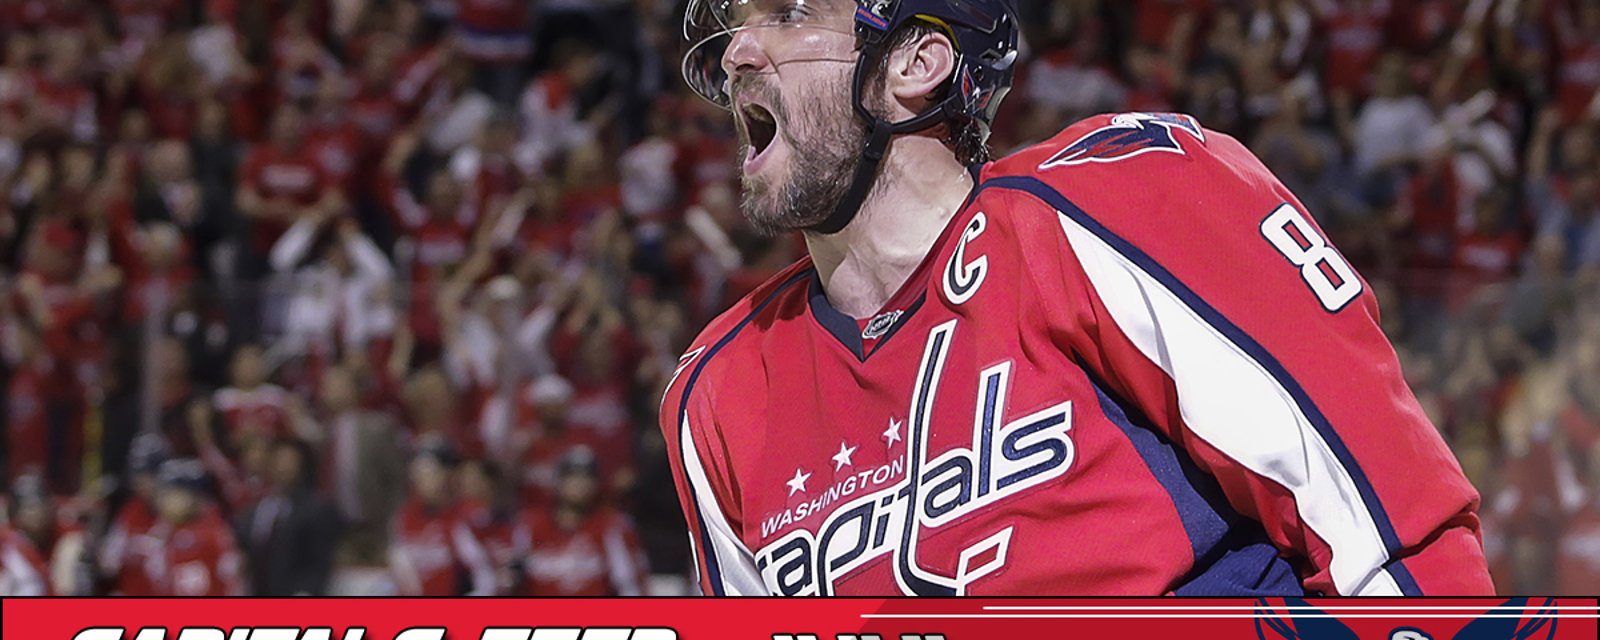 Must see: Ovechkin has the most “hockey guy” response after getting his face cut by a puck